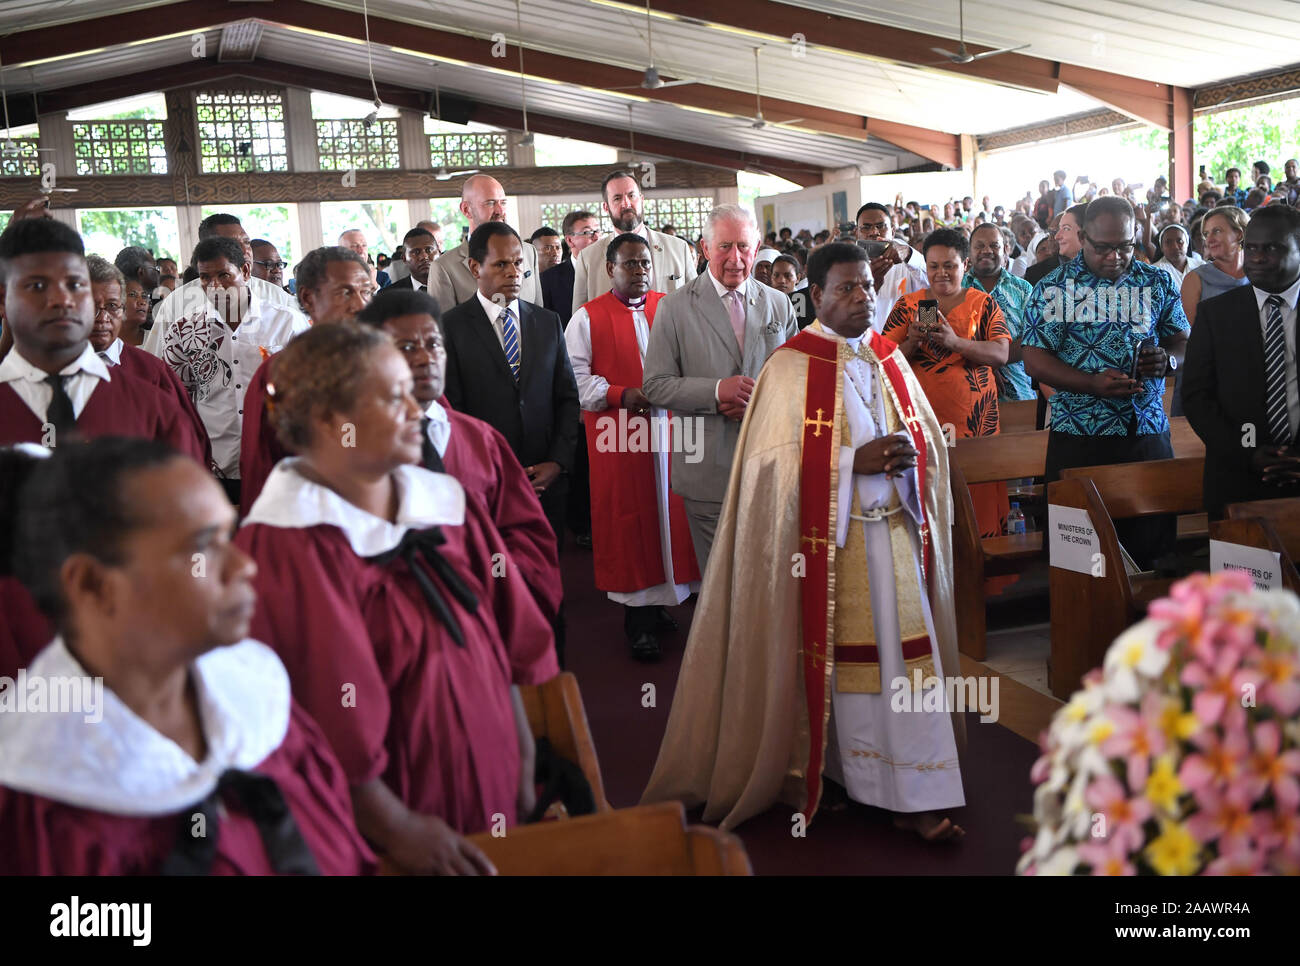 The Prince of Wales attends a service at the Cathedral Church of St Barnabas, during the second day of the royal visit to the Solomon Islands. Stock Photo